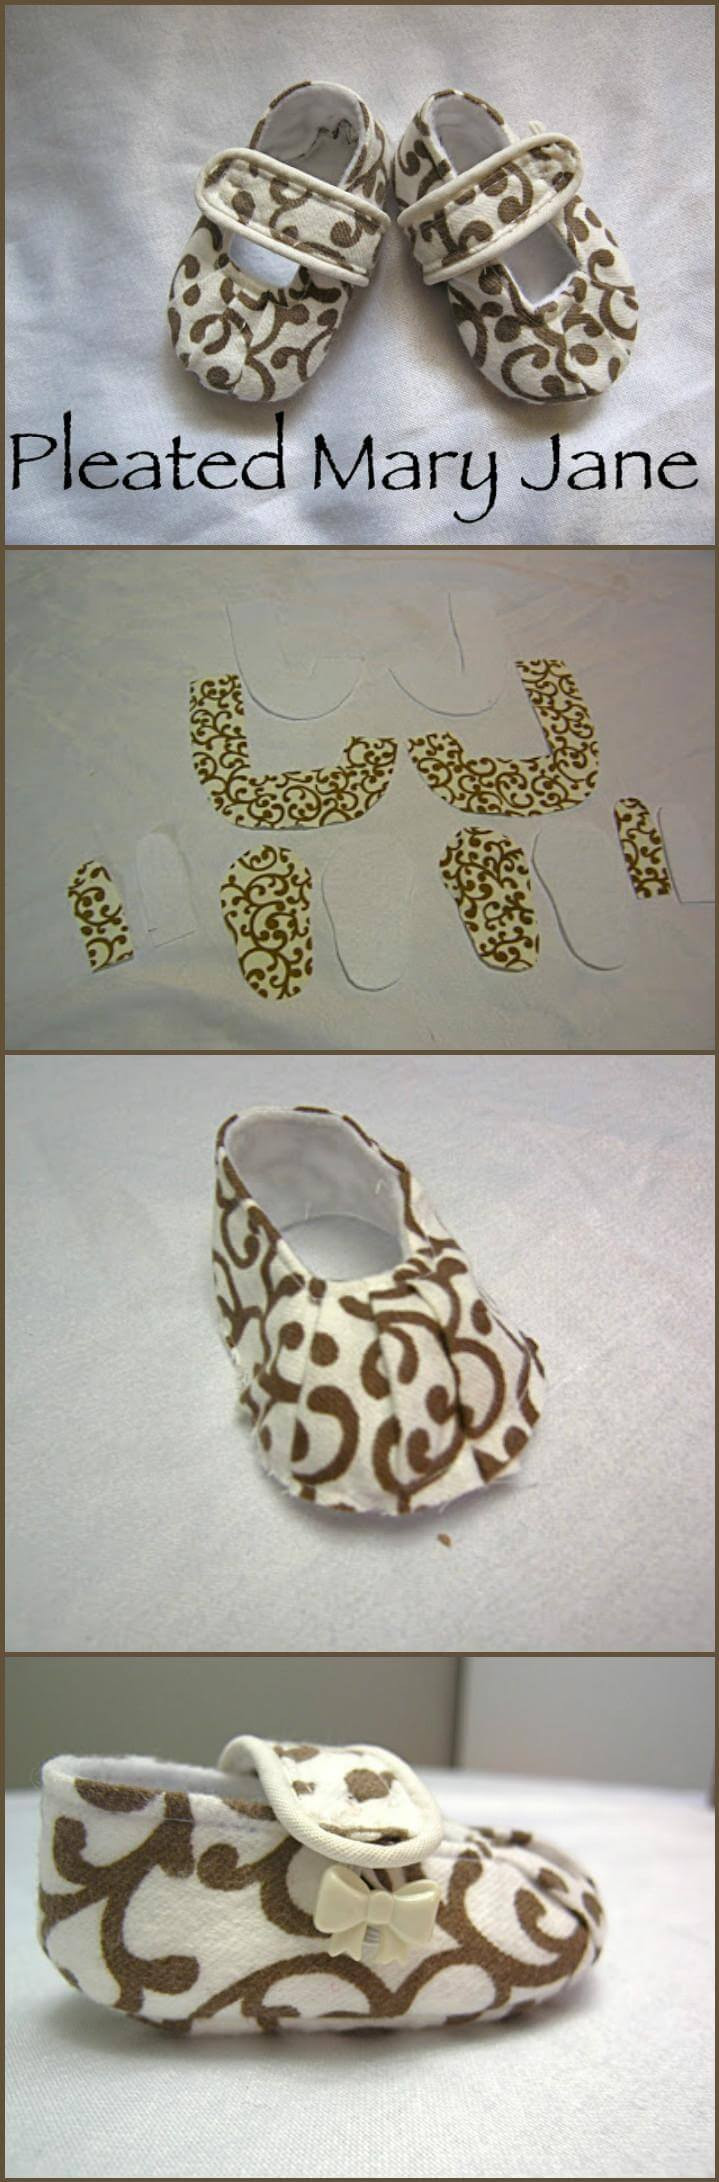 DIY Baby Shoes Pattern
 55 DIY Baby Shoes with Free Patterns and Tutorials ⋆ DIY